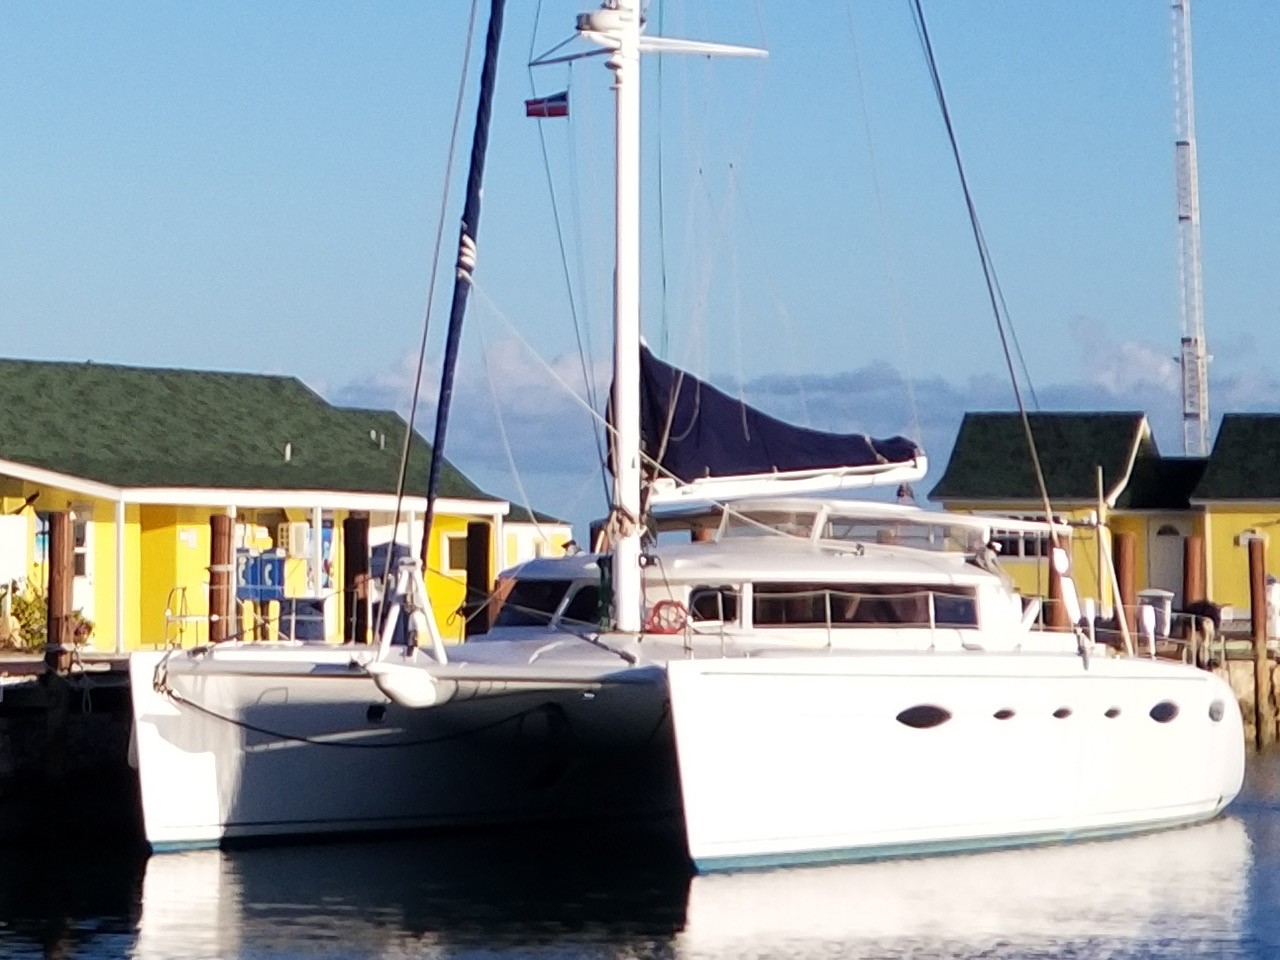 Latest Listings and Price Cuts this Week on Catamarans.com